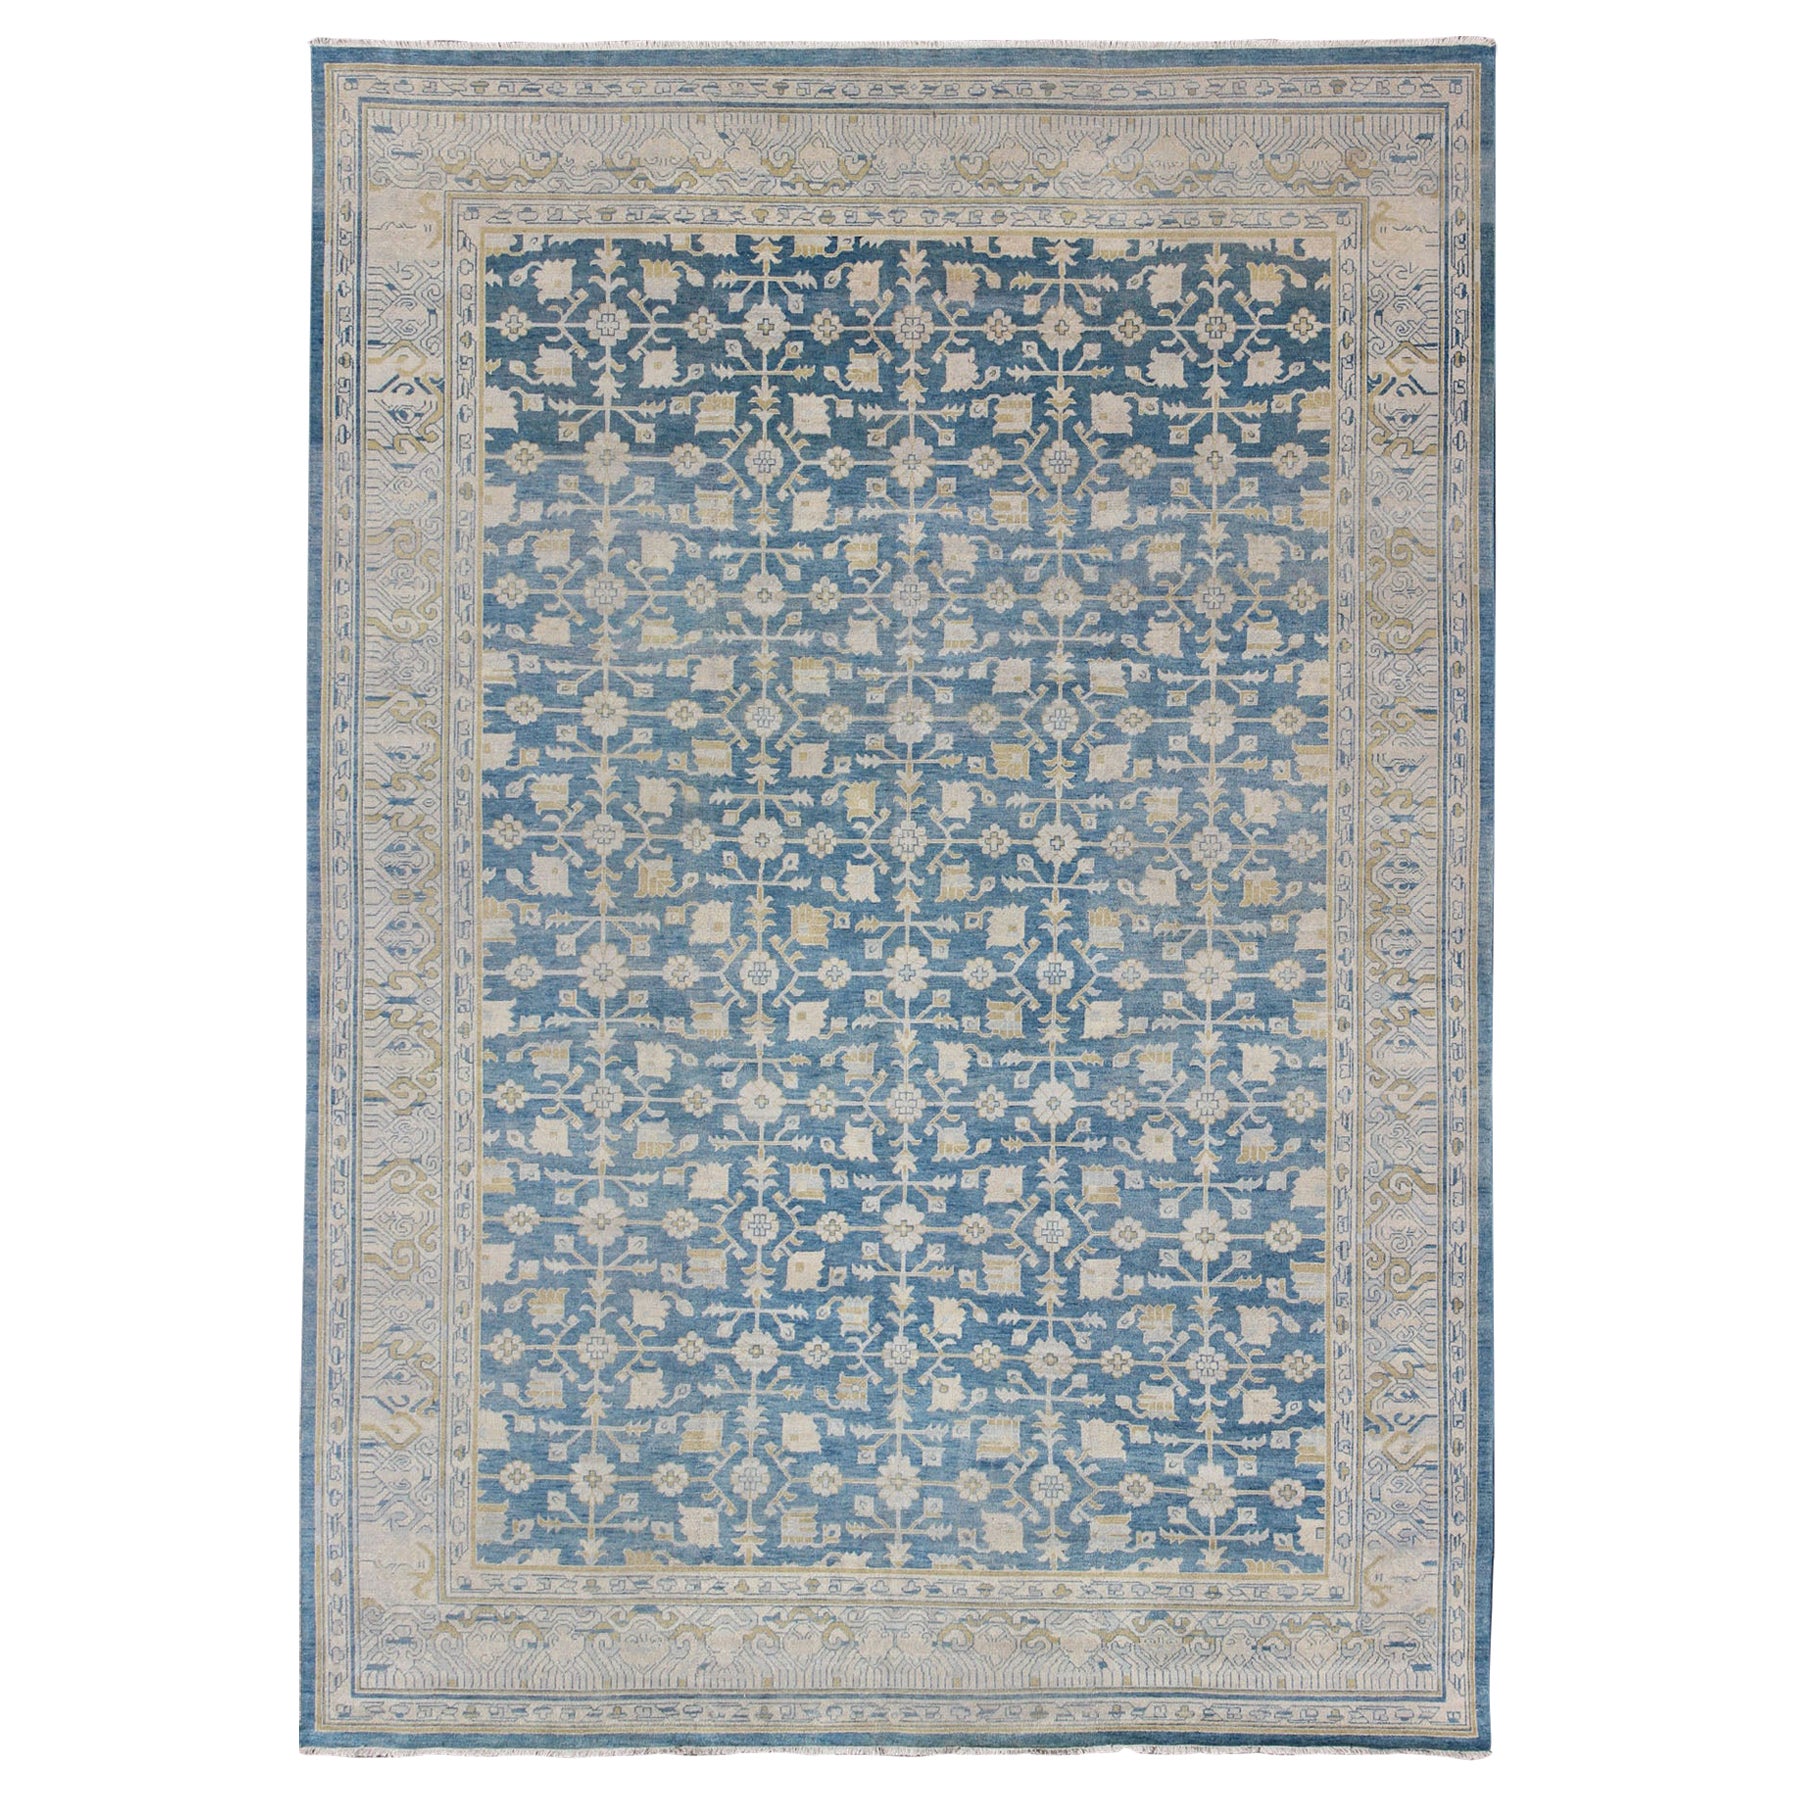 Khotan Design Rug with All-Over Sub-Geometric Pattern in Blue, Tan & Gold